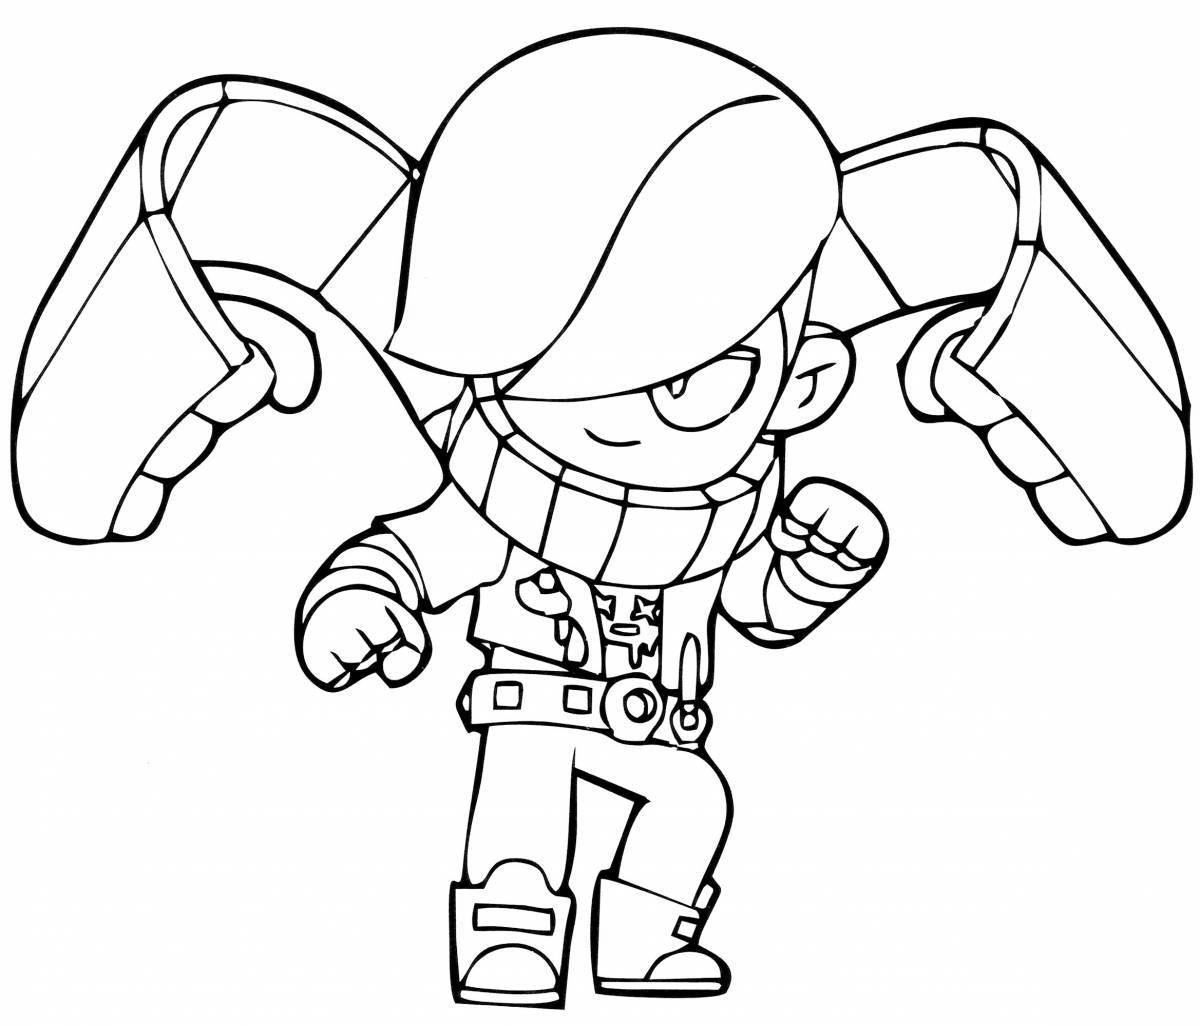 Playful star brawl coloring page